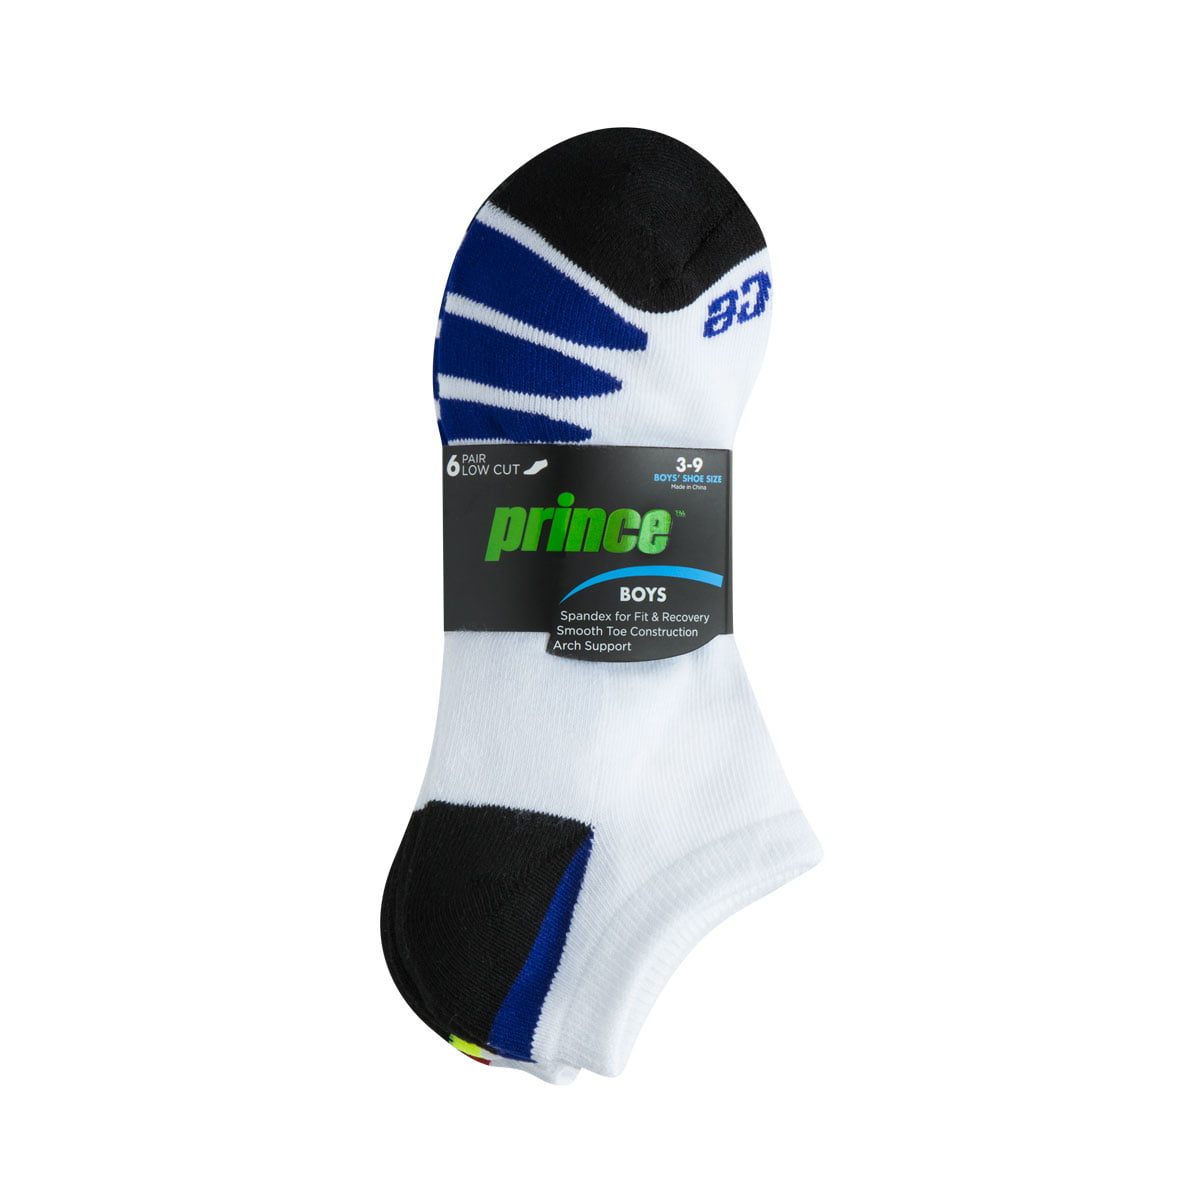 Prince Boys Low Cut Athletic Socks with Cushion for Active Kids 